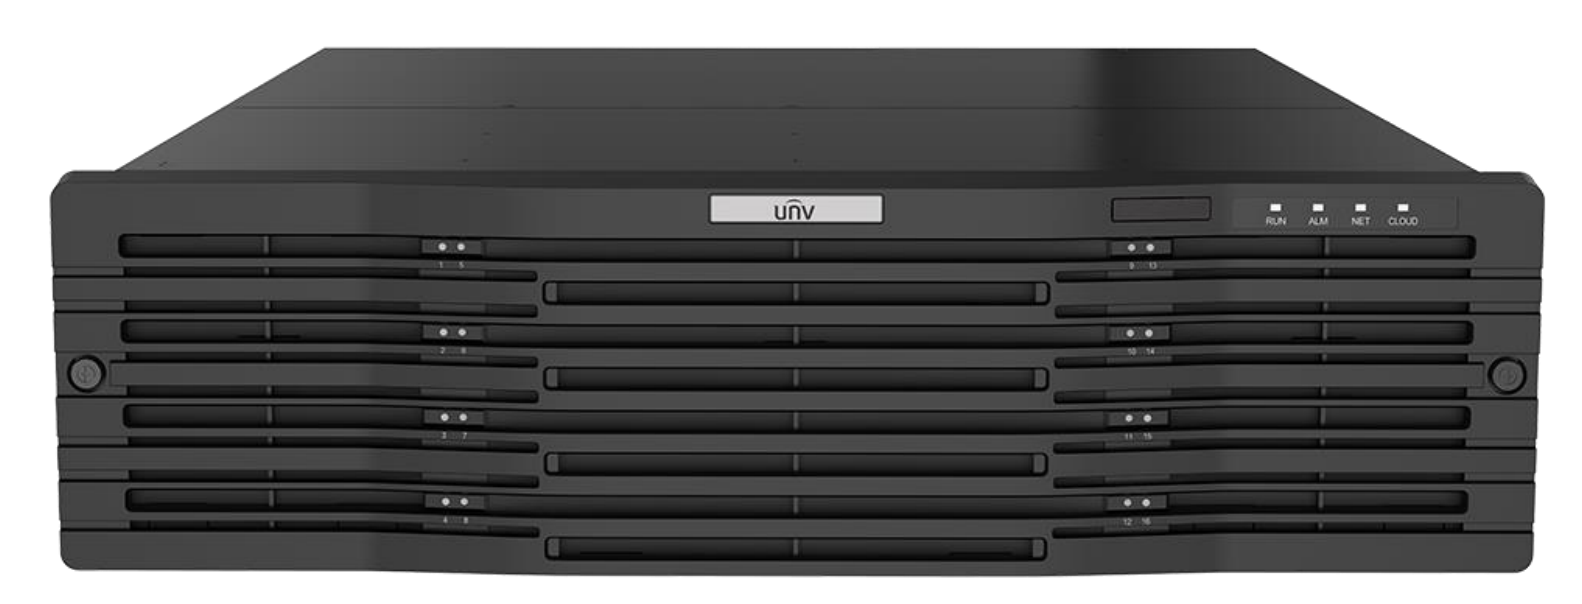 UNIVIEW PRO SERIES 128CH NVR UPTO 16MP 640Mbps INPUT 16x SATA HDD PORT UP TO 16TB EACH